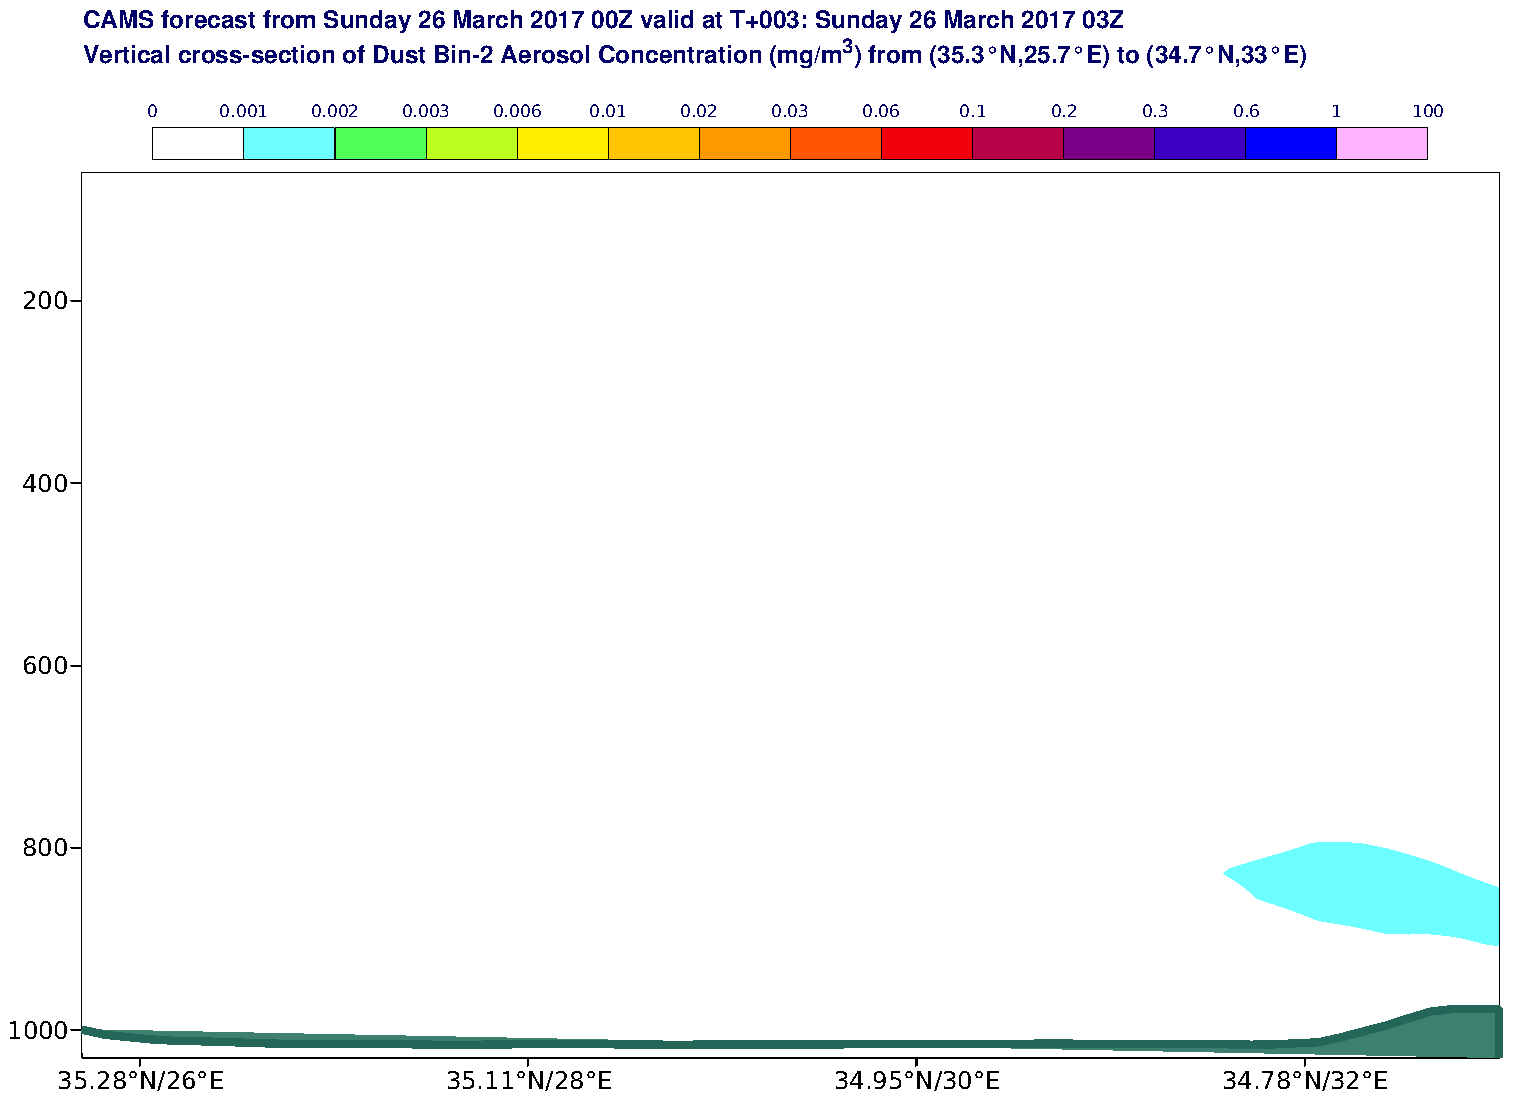 Vertical cross-section of Dust Bin-2 Aerosol Concentration (mg/m3) valid at T3 - 2017-03-26 03:00